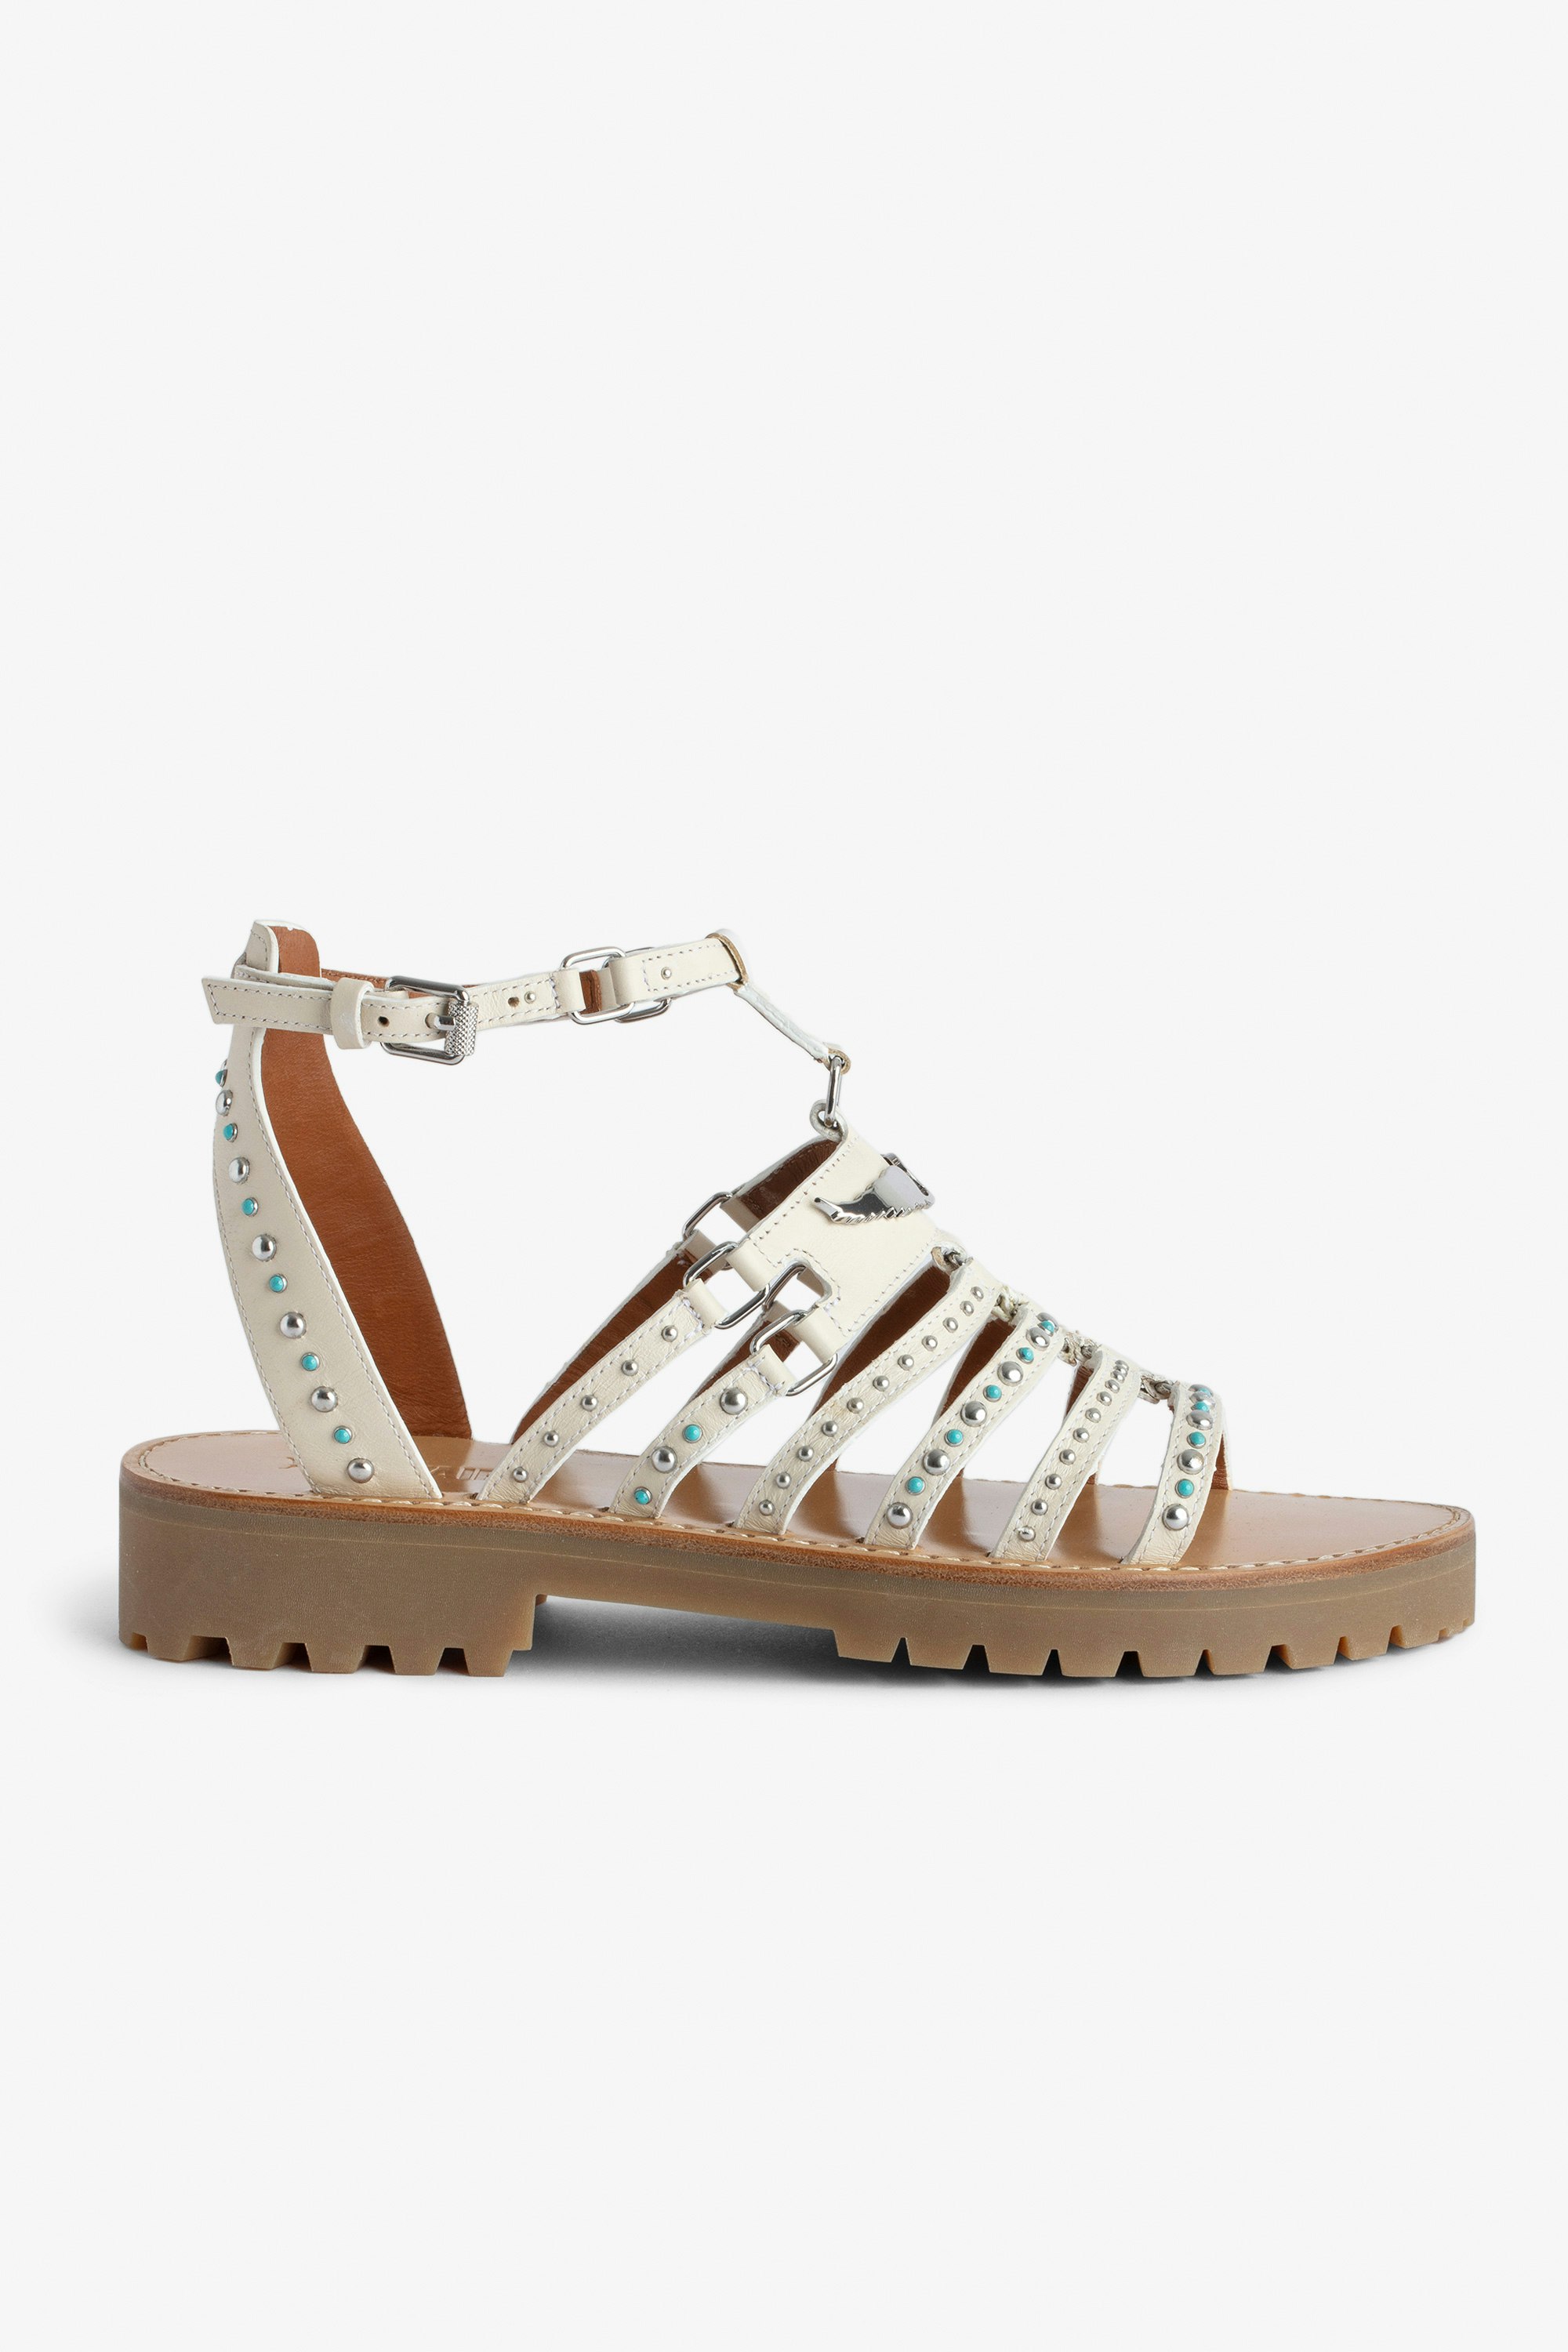 Joe Sandals - Ecru vegetable-tanned leather sandals with straps, adjustable buckle, wings charm and folk jewels.